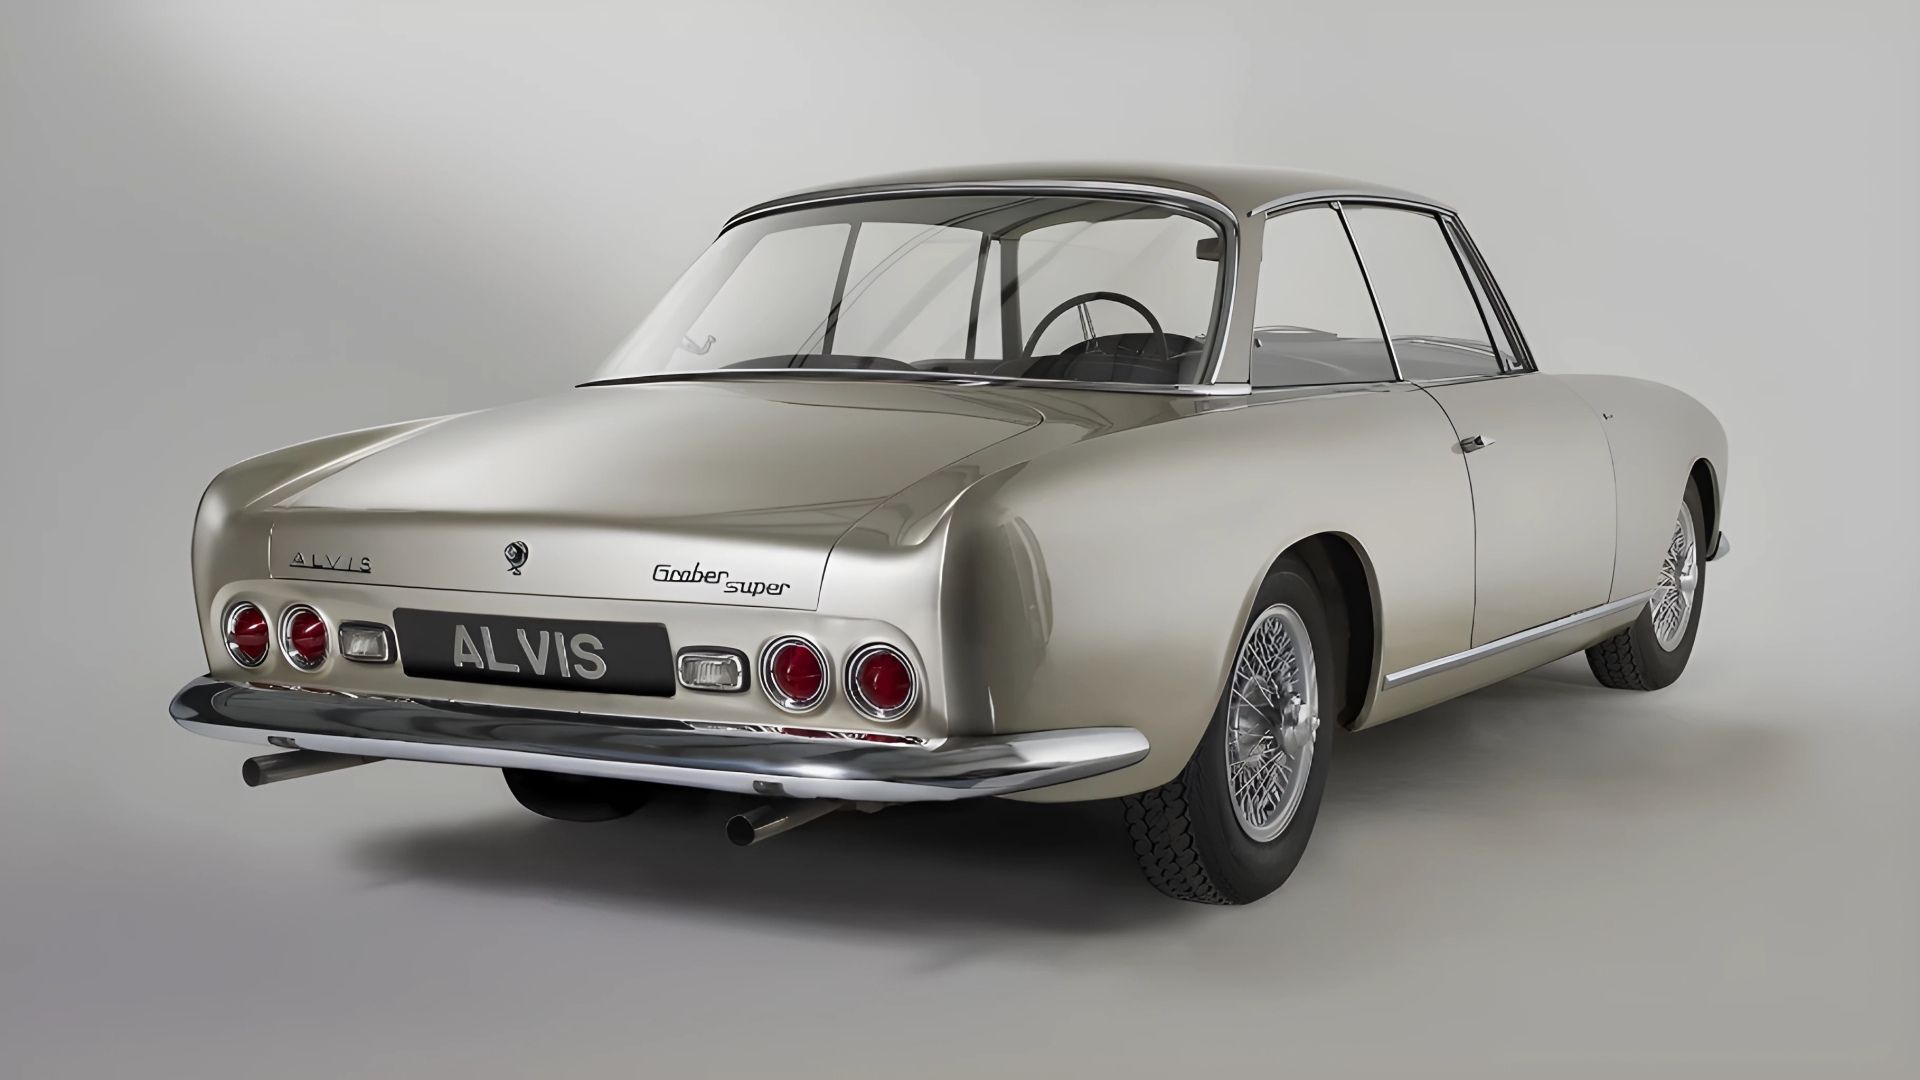 The Rear And Side Profiles Of The Alvis Graber Super Coupe